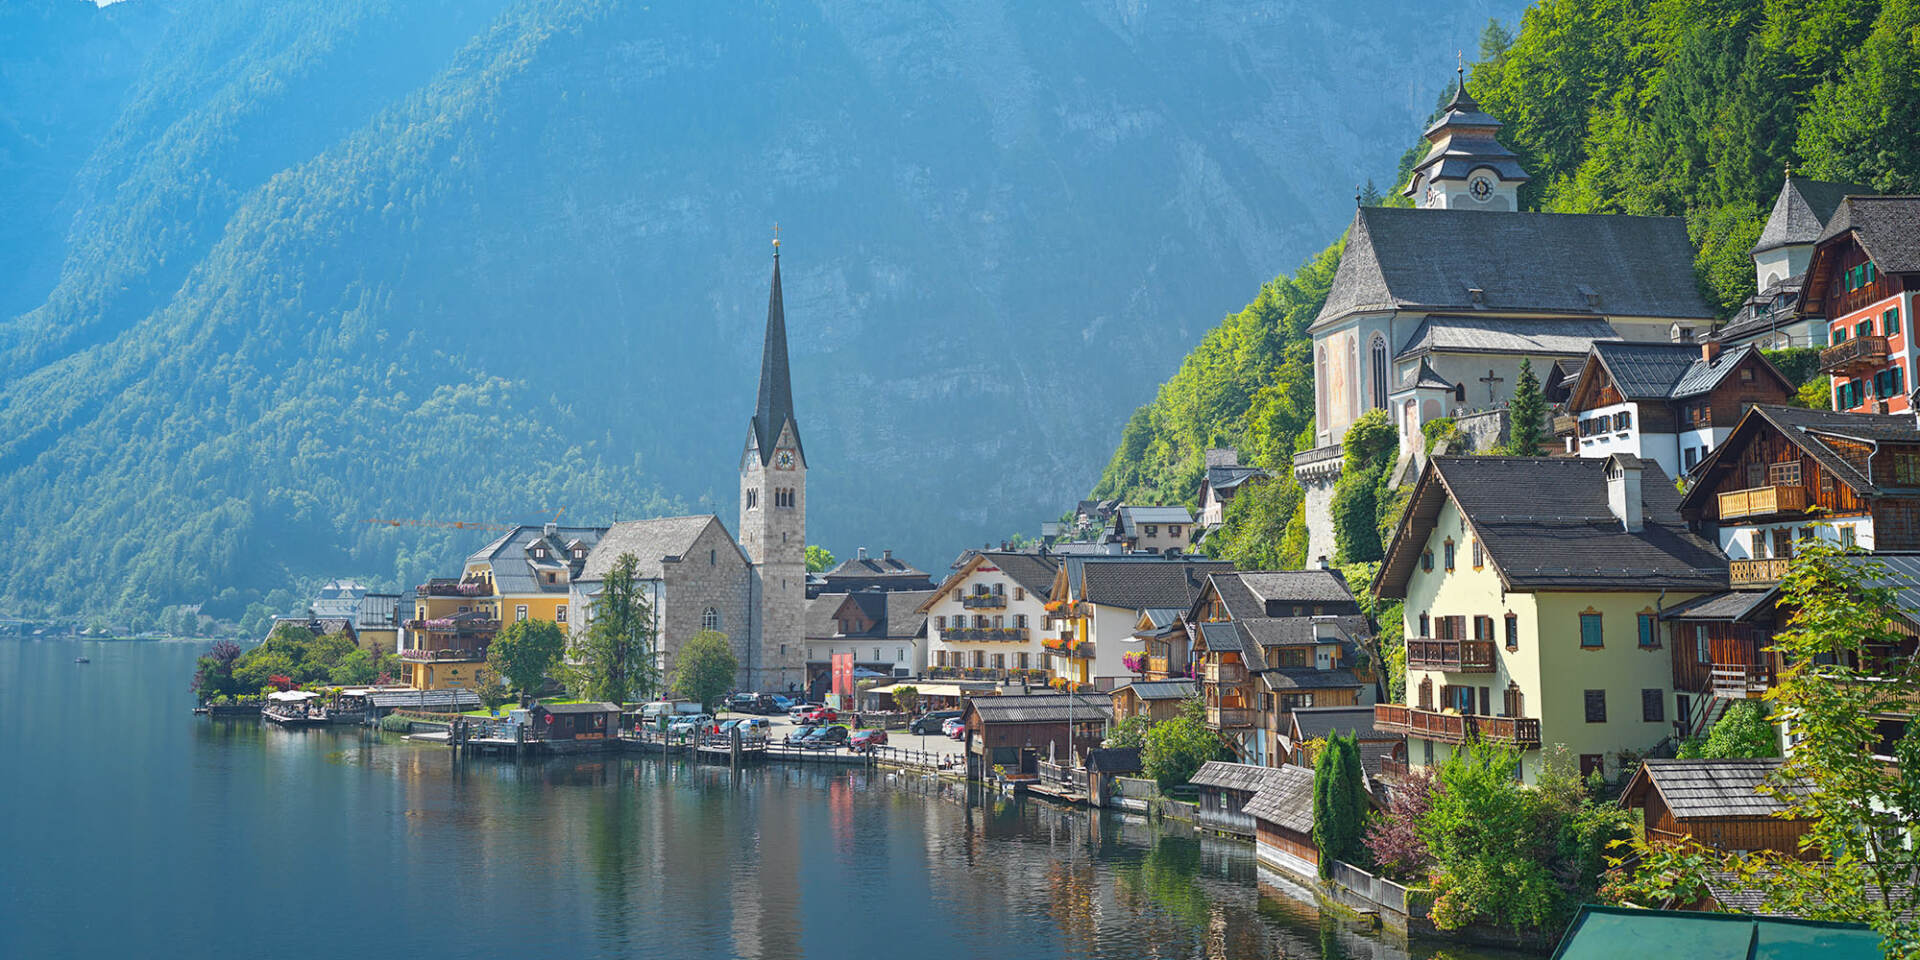 Hallstatt - View of the town with the church, next to it Lake Hallstatt and the mountains - Hallstatt Tour with Salzburg Panorama Tours